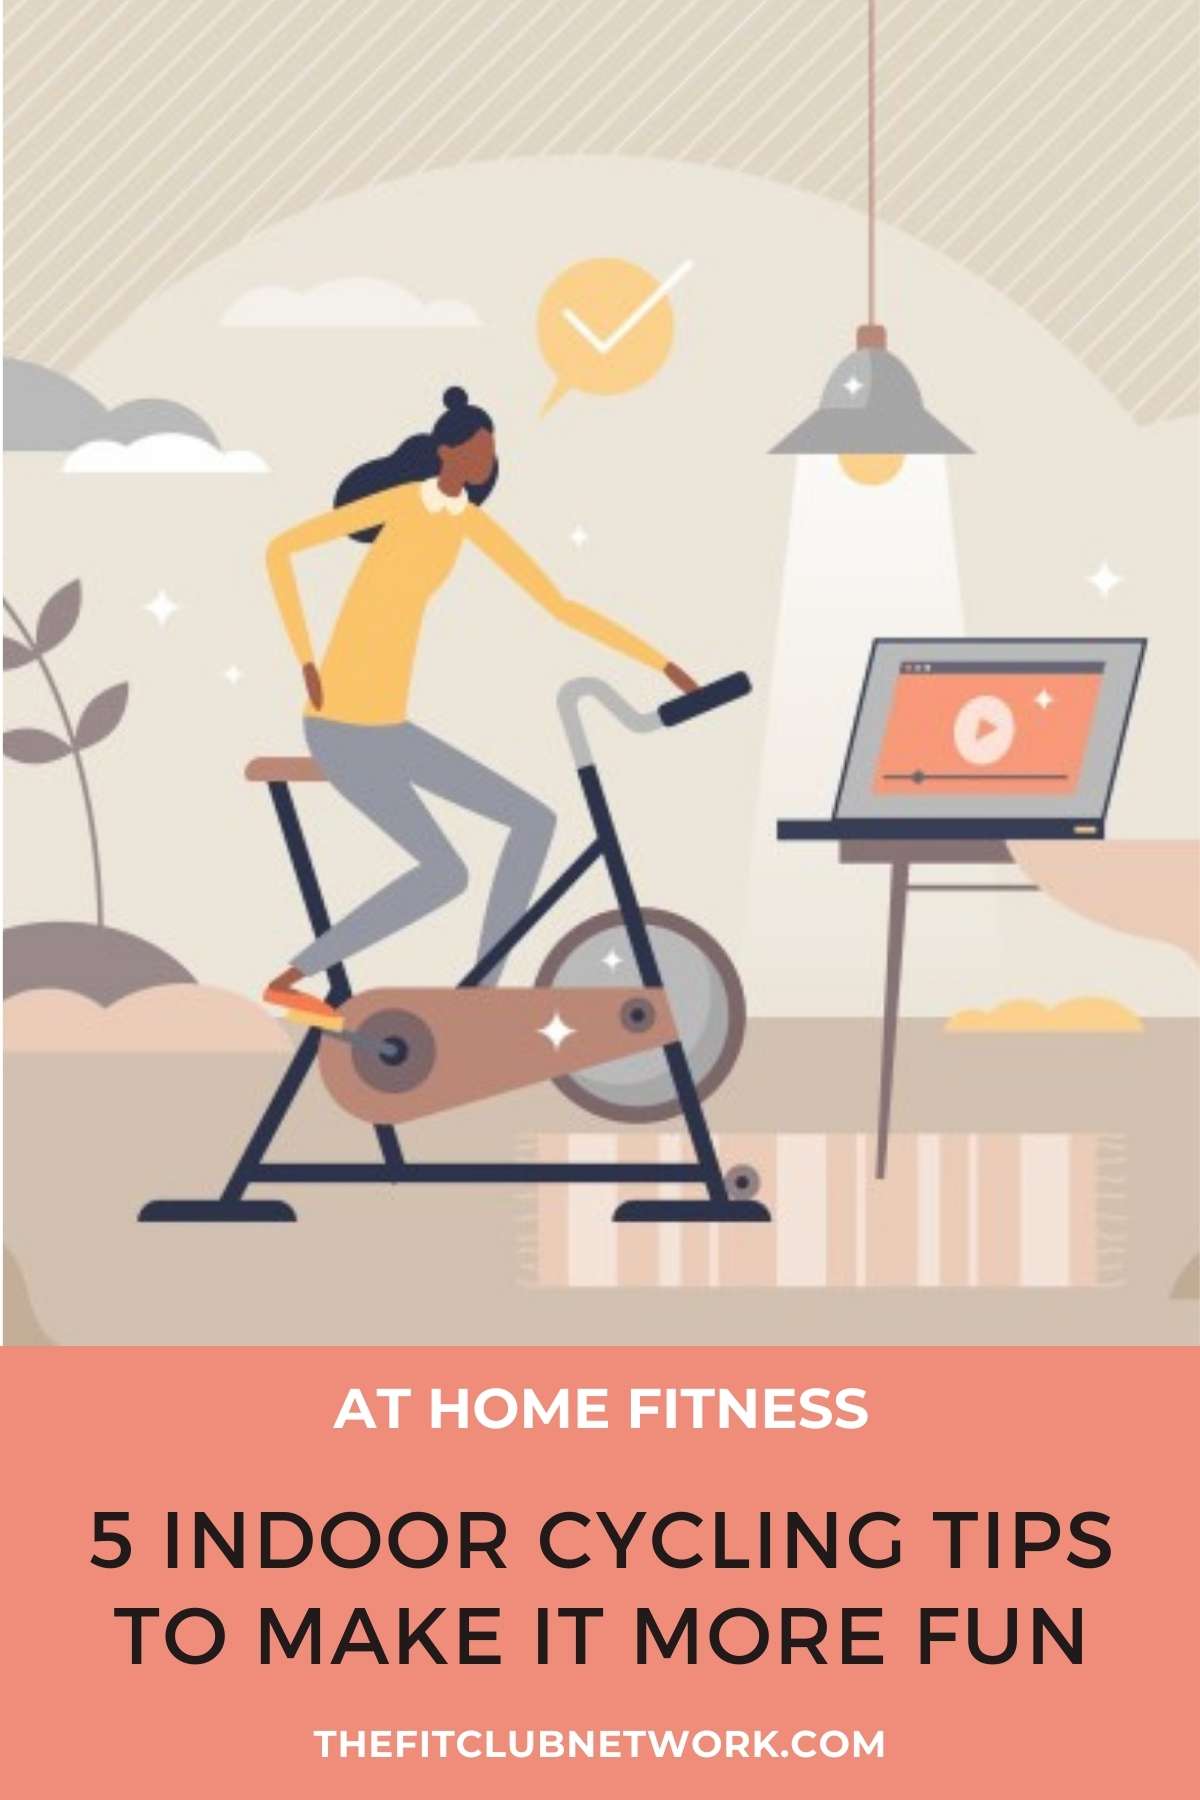 5 Indoor Cycling Tips to Make It More Fun | THEFITCLUBNETWORK.COM